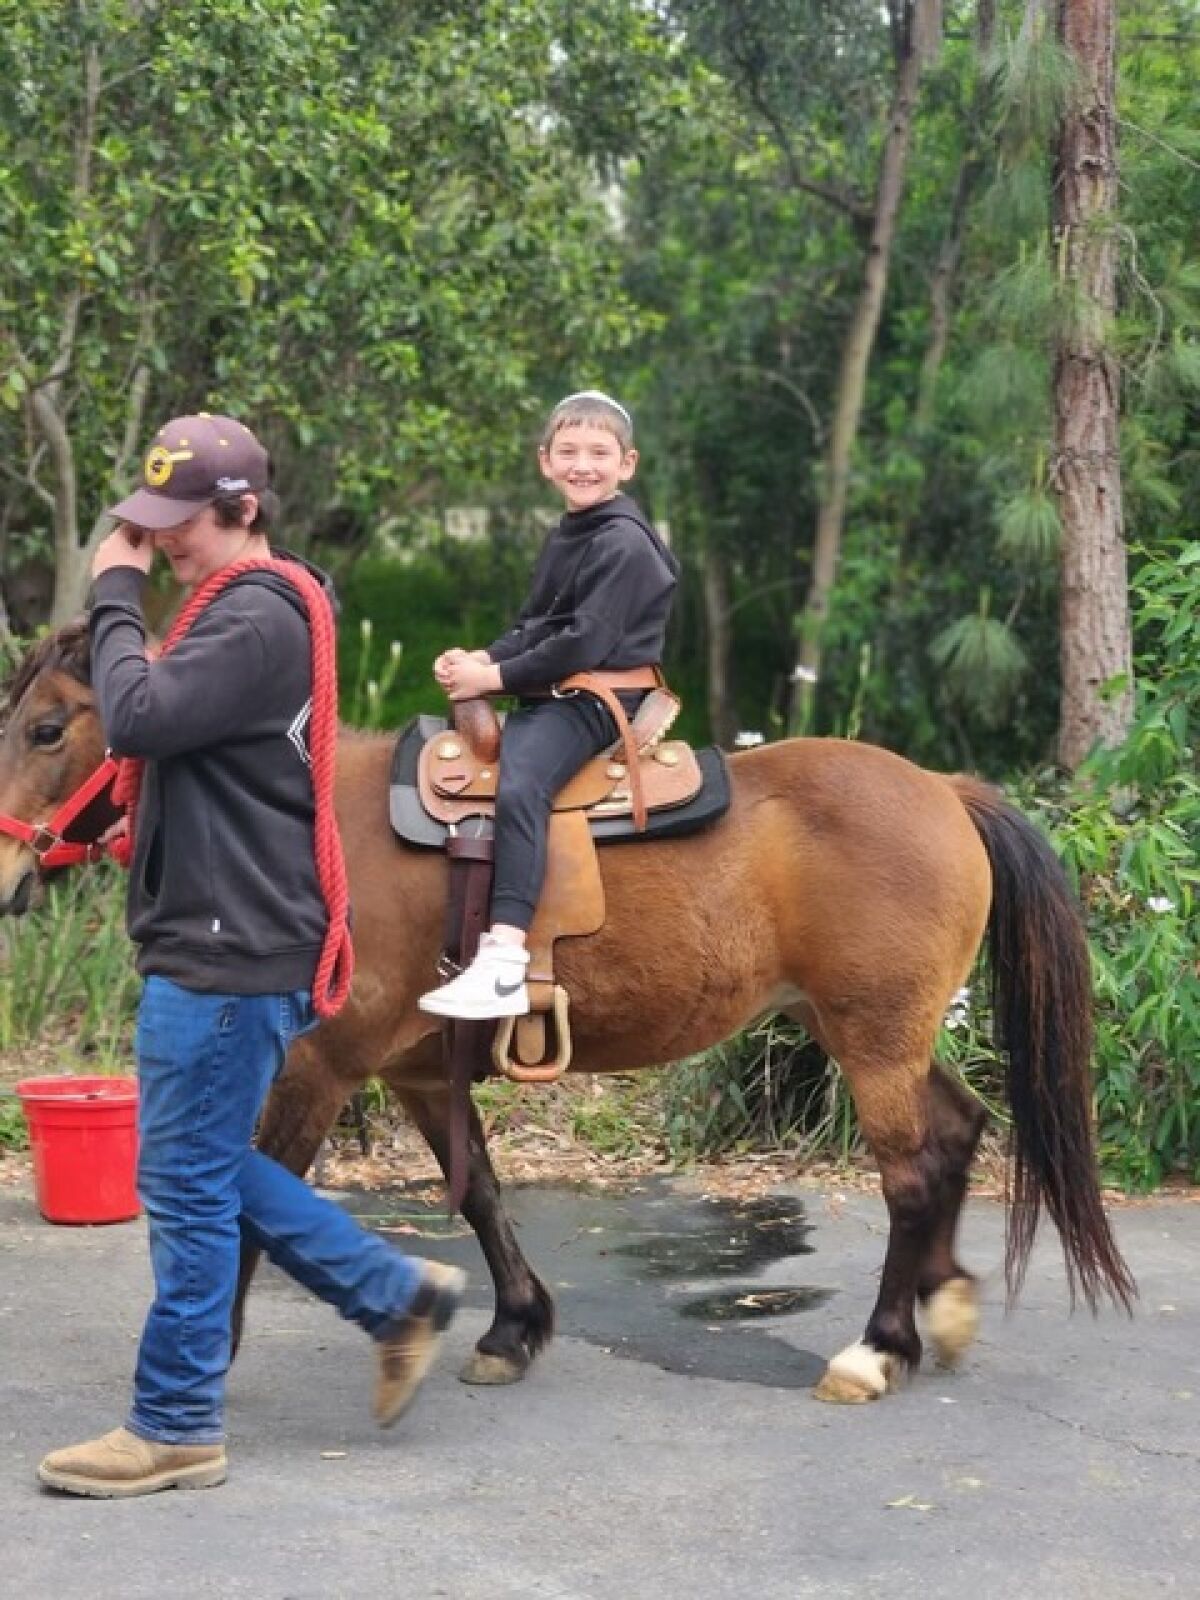 The event included pony rides.